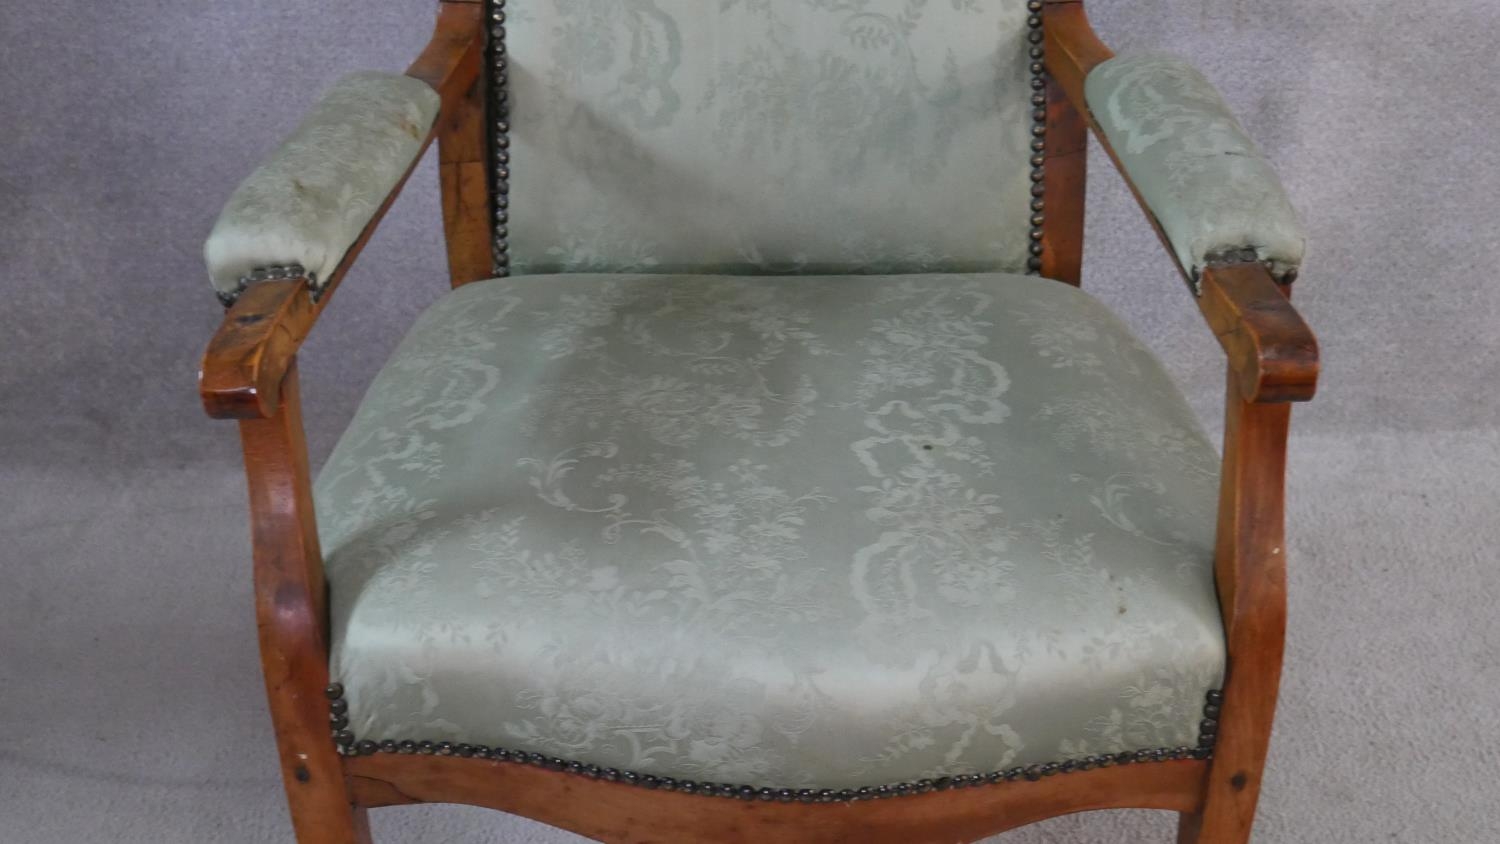 A 19th century French provincial fruitwood armchair in floral damask upholstery. H.109cm - Image 2 of 5